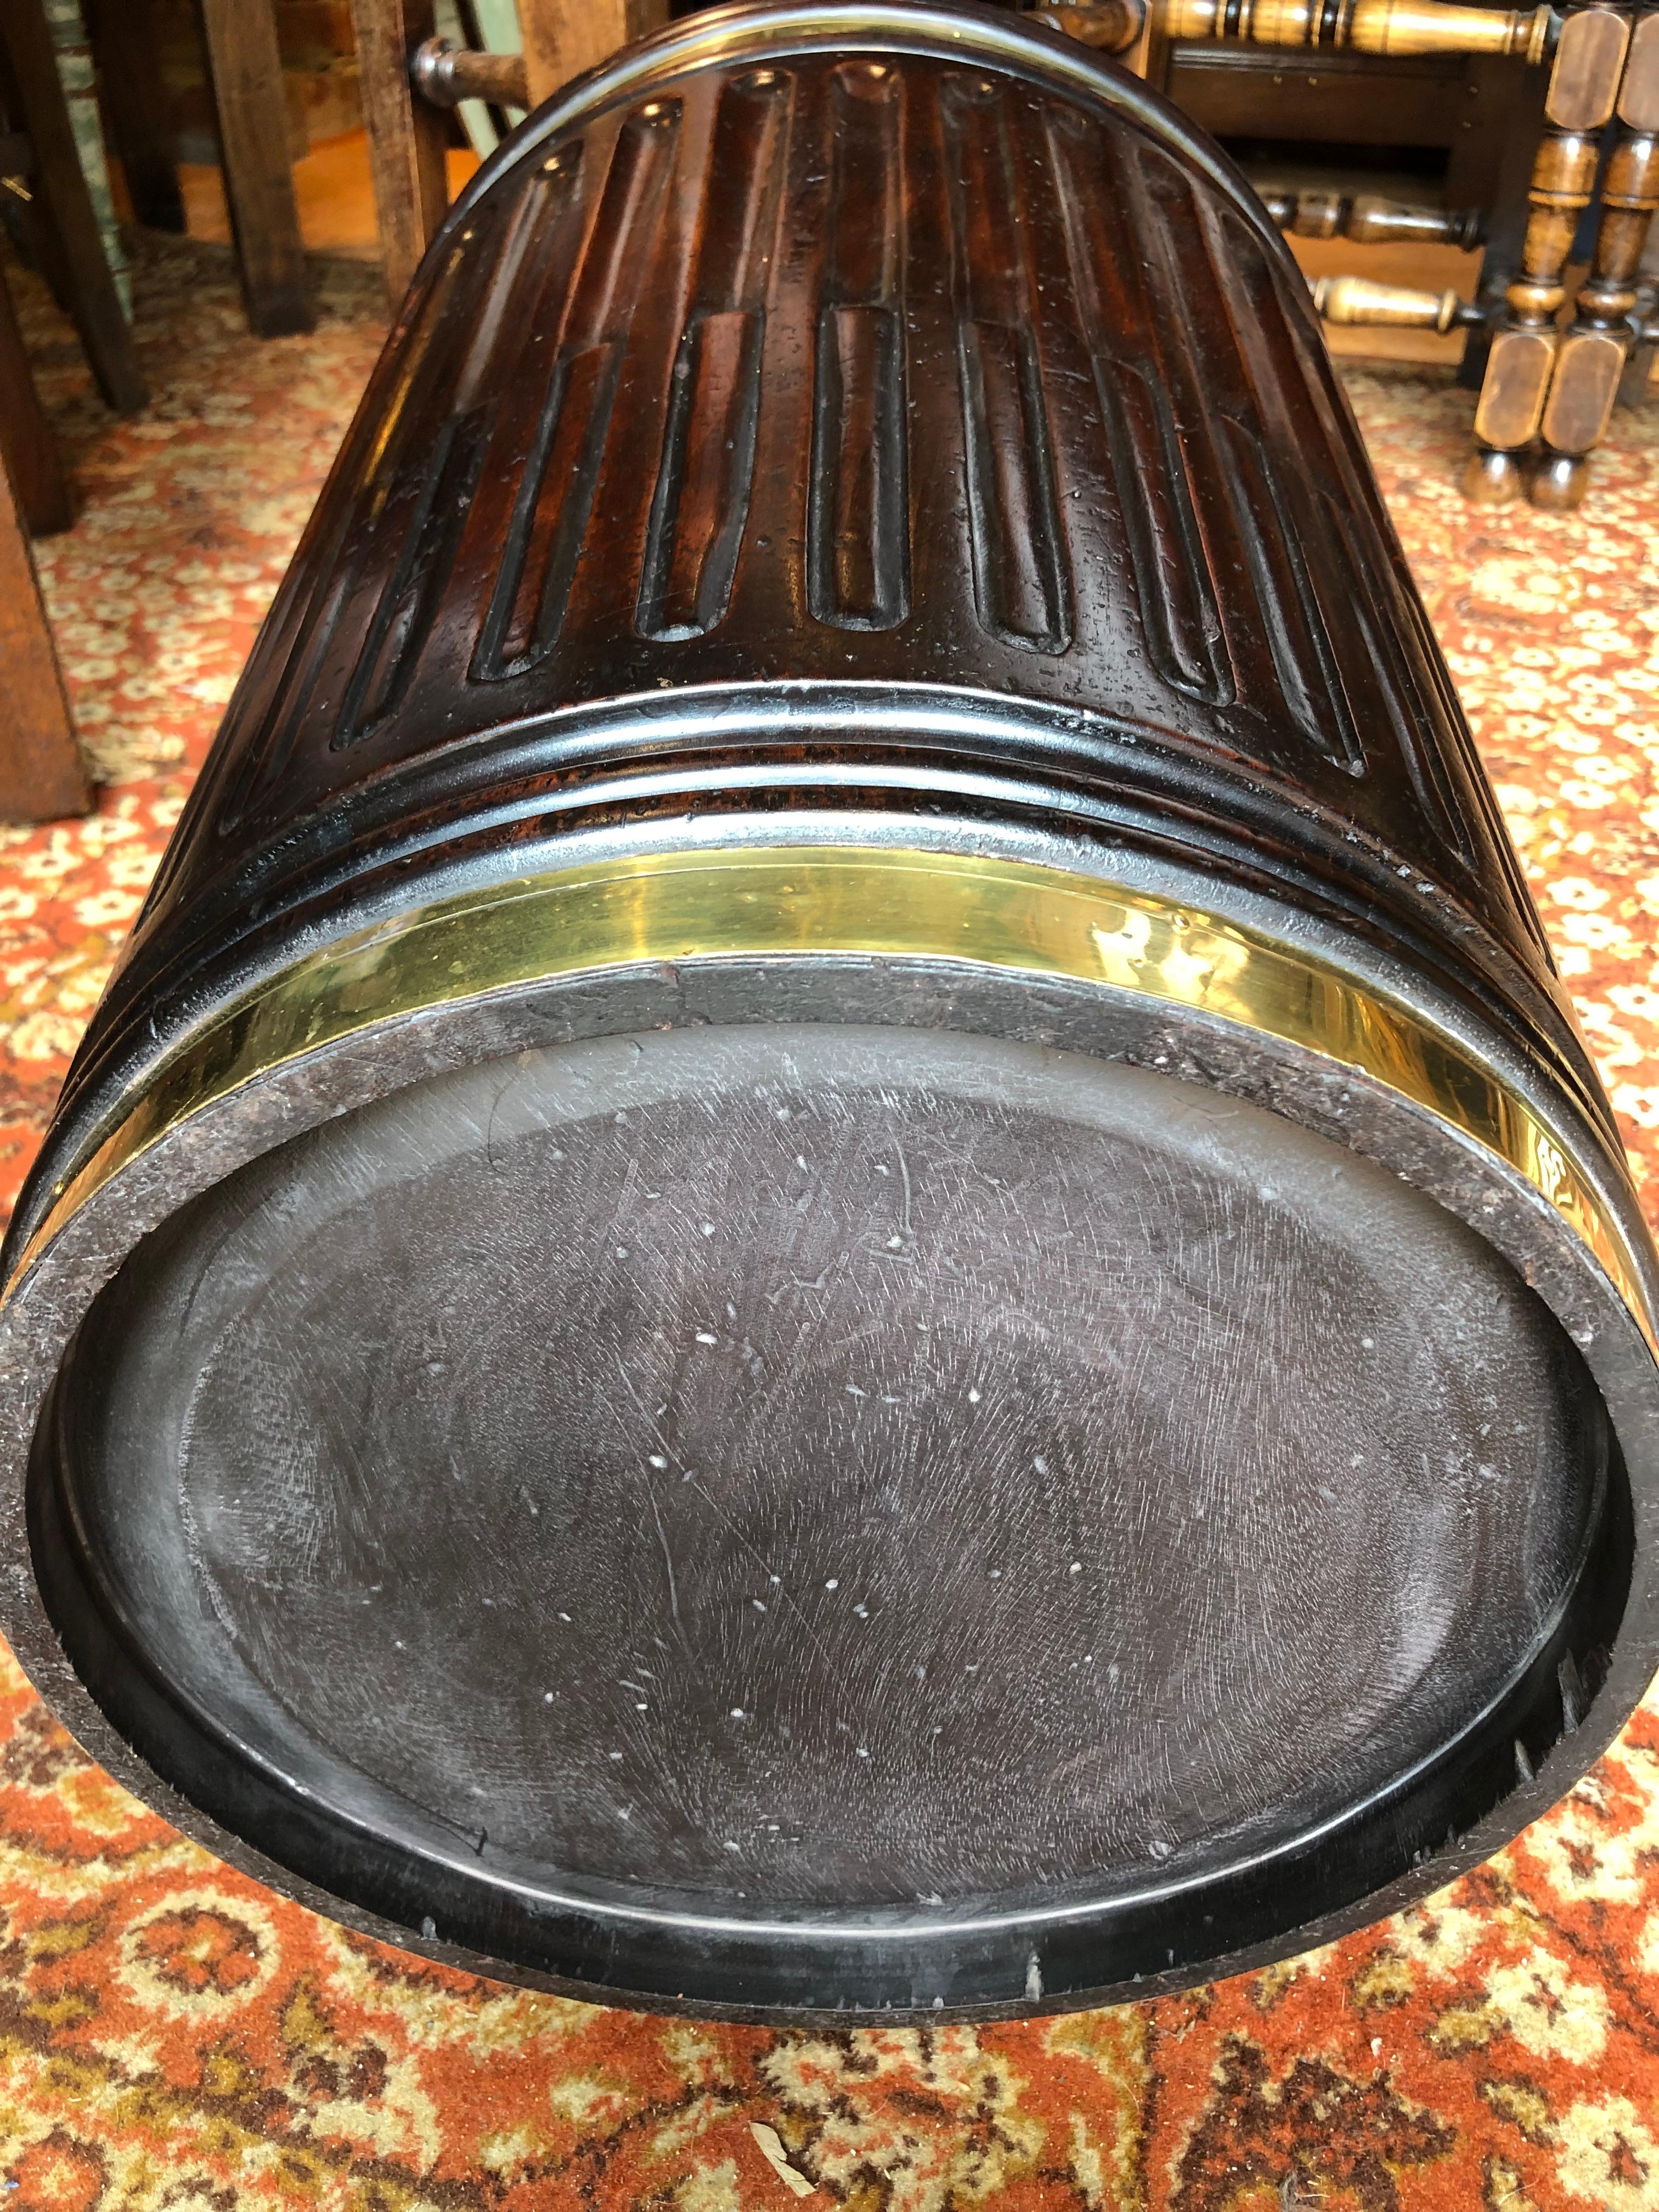 Very handsome pair of Georgian style brass bound mahogany turf, or Irish peat buckets. The tapered fluted moulded sides have polished brass bands with twist grip loop handles. The interiors are fitted with sealed brass liners, and can therefore be